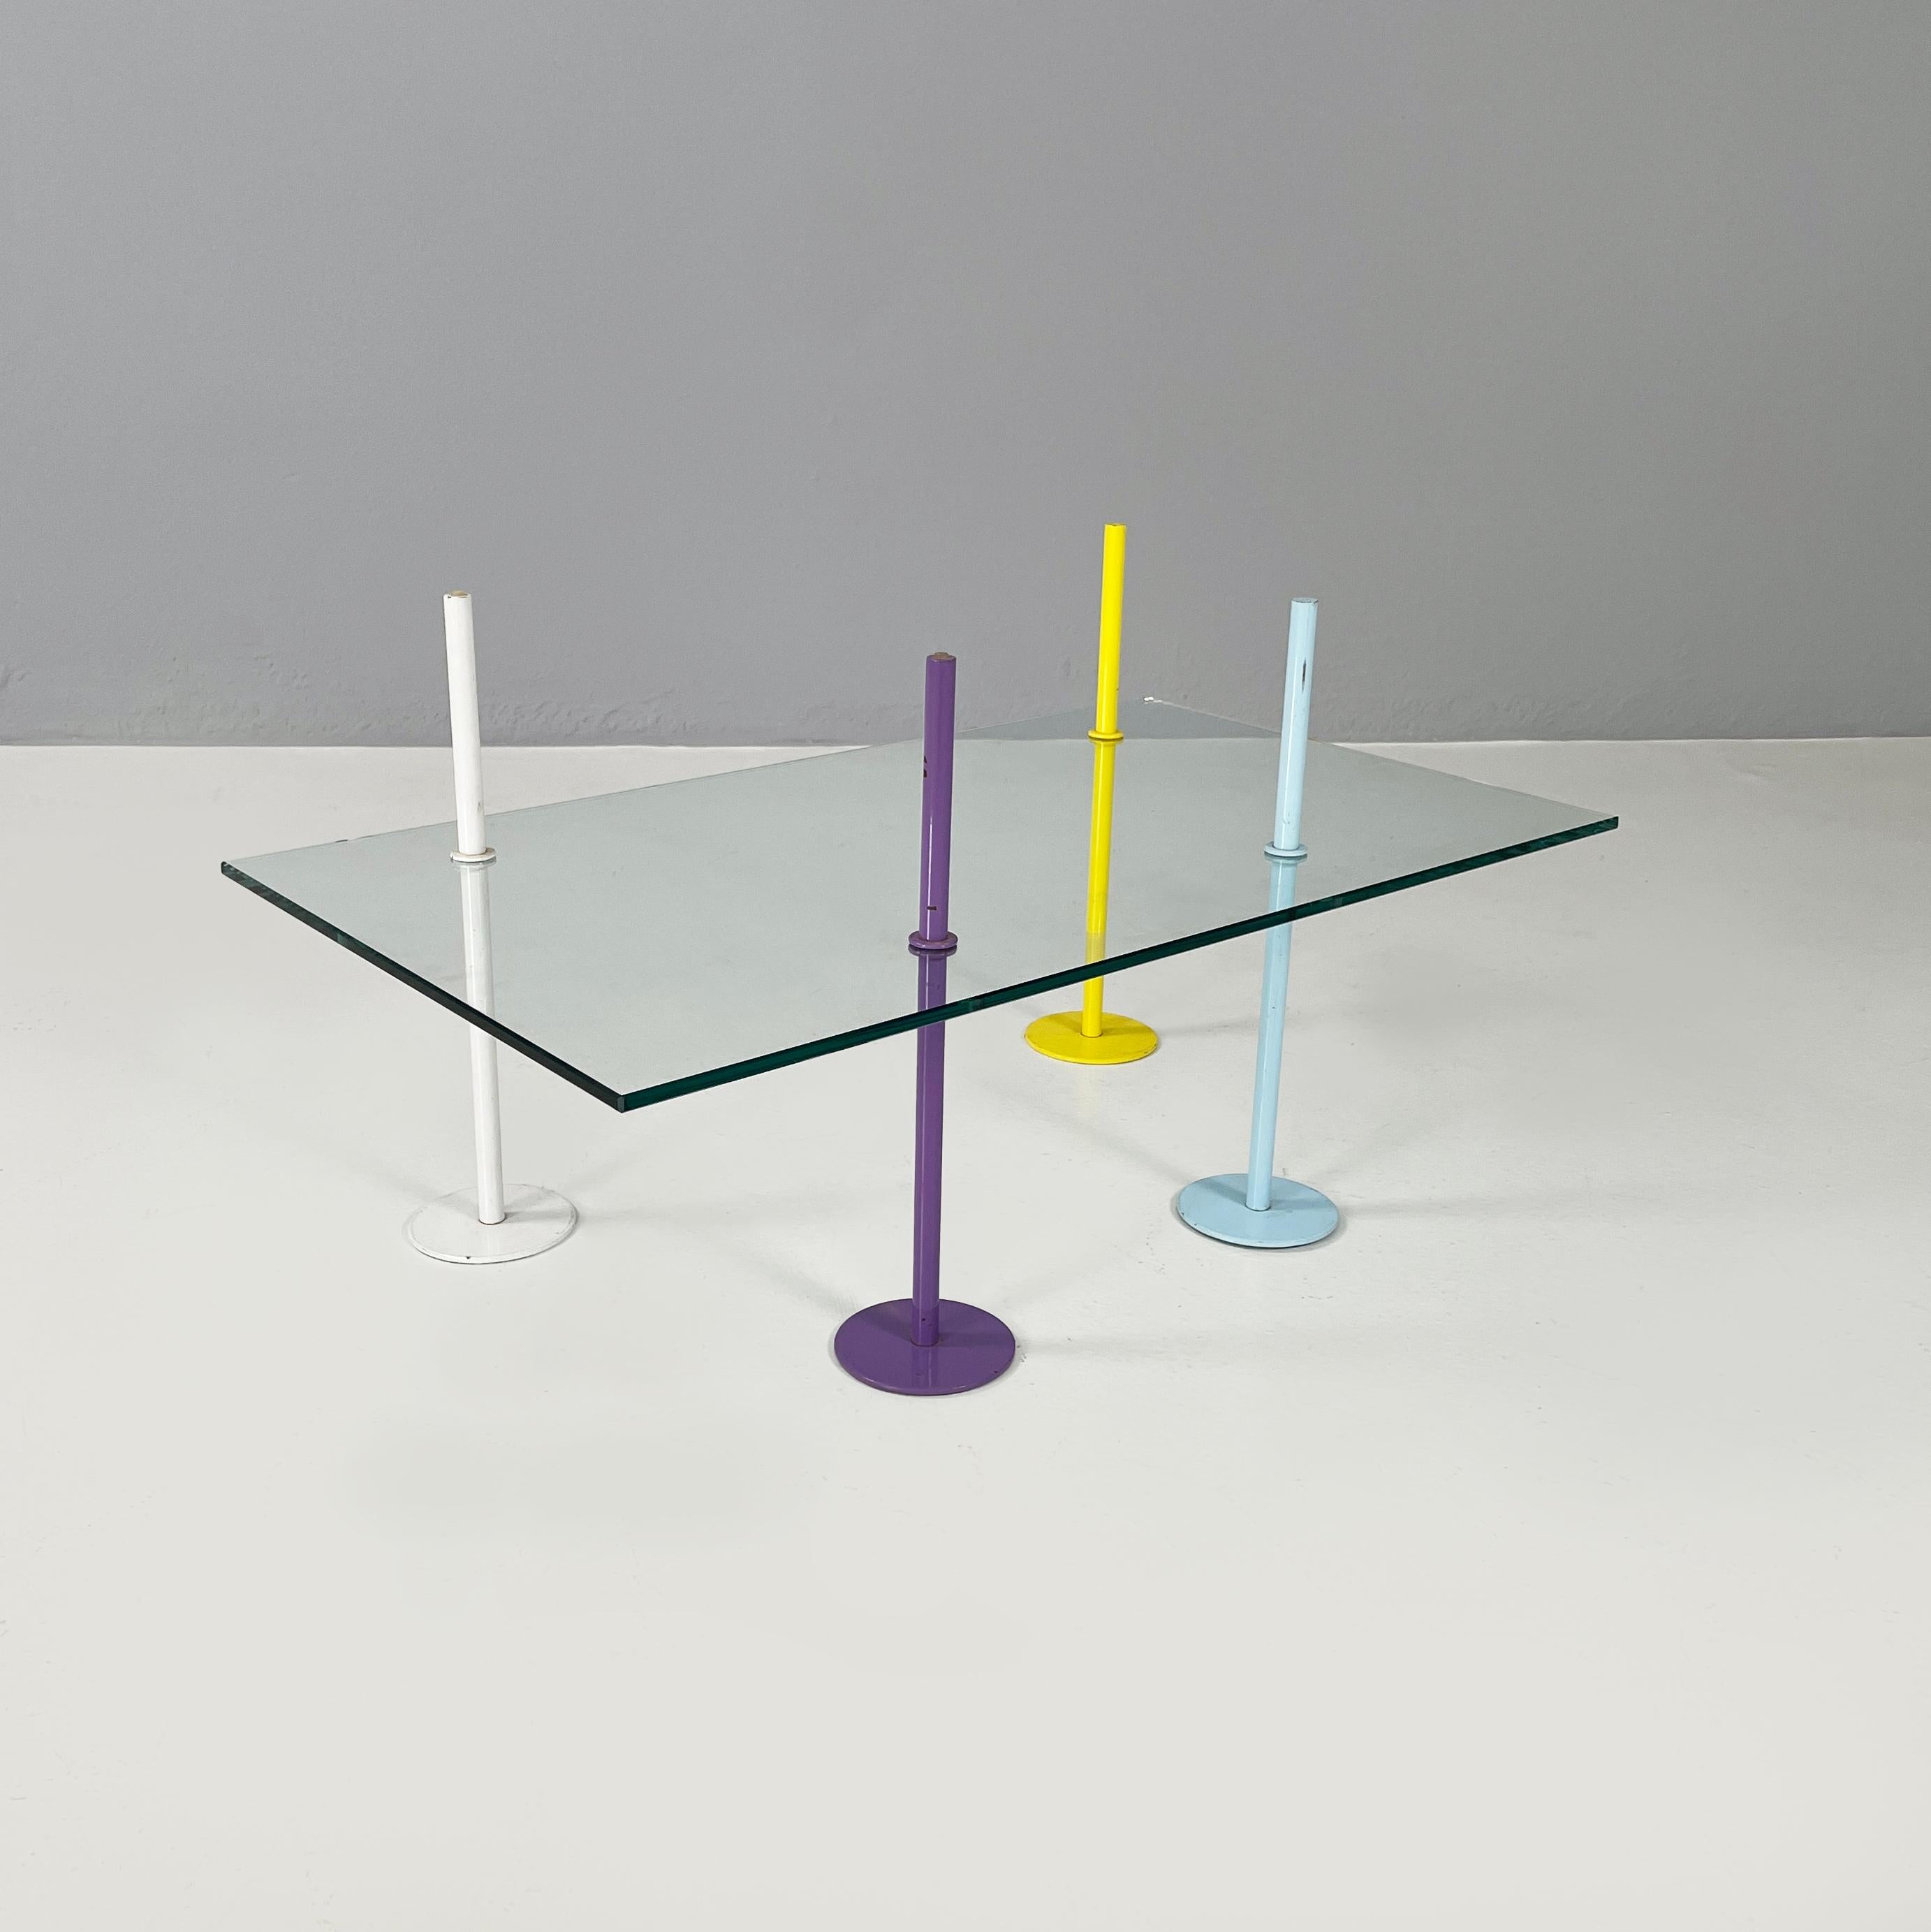 Italian modern Rectangular Coffe table in glass and colored metal rods, 1980s
Coffee table with rectangular glass top. The structure is made up of 4 metal rods that cross the top. Each of them has a different color: purple, yellow, blue and white.